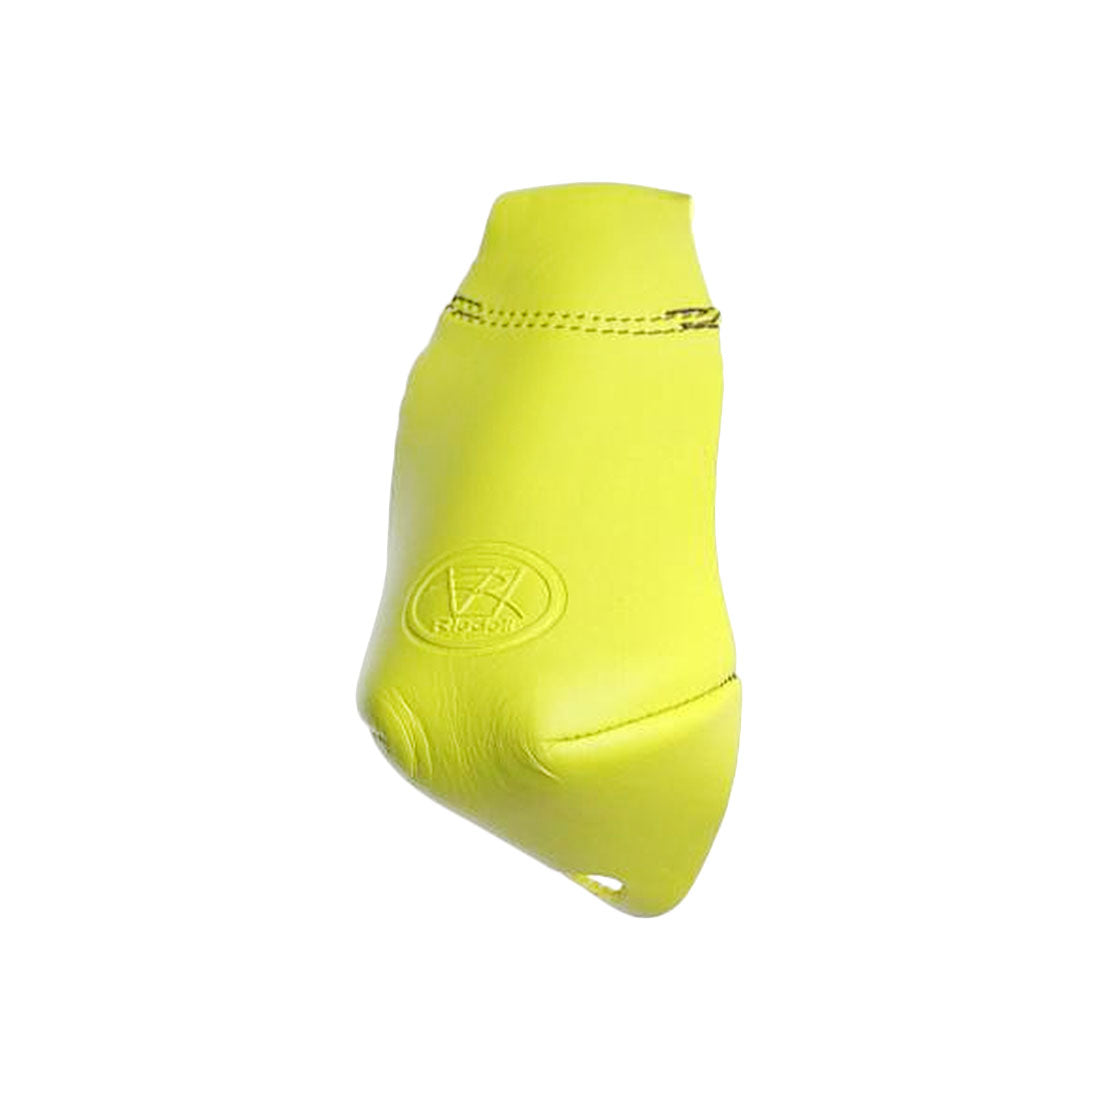 Riedell Toe Cap Pro Fit 2pk - Leather Yellow Roller Skate Hardware and Parts